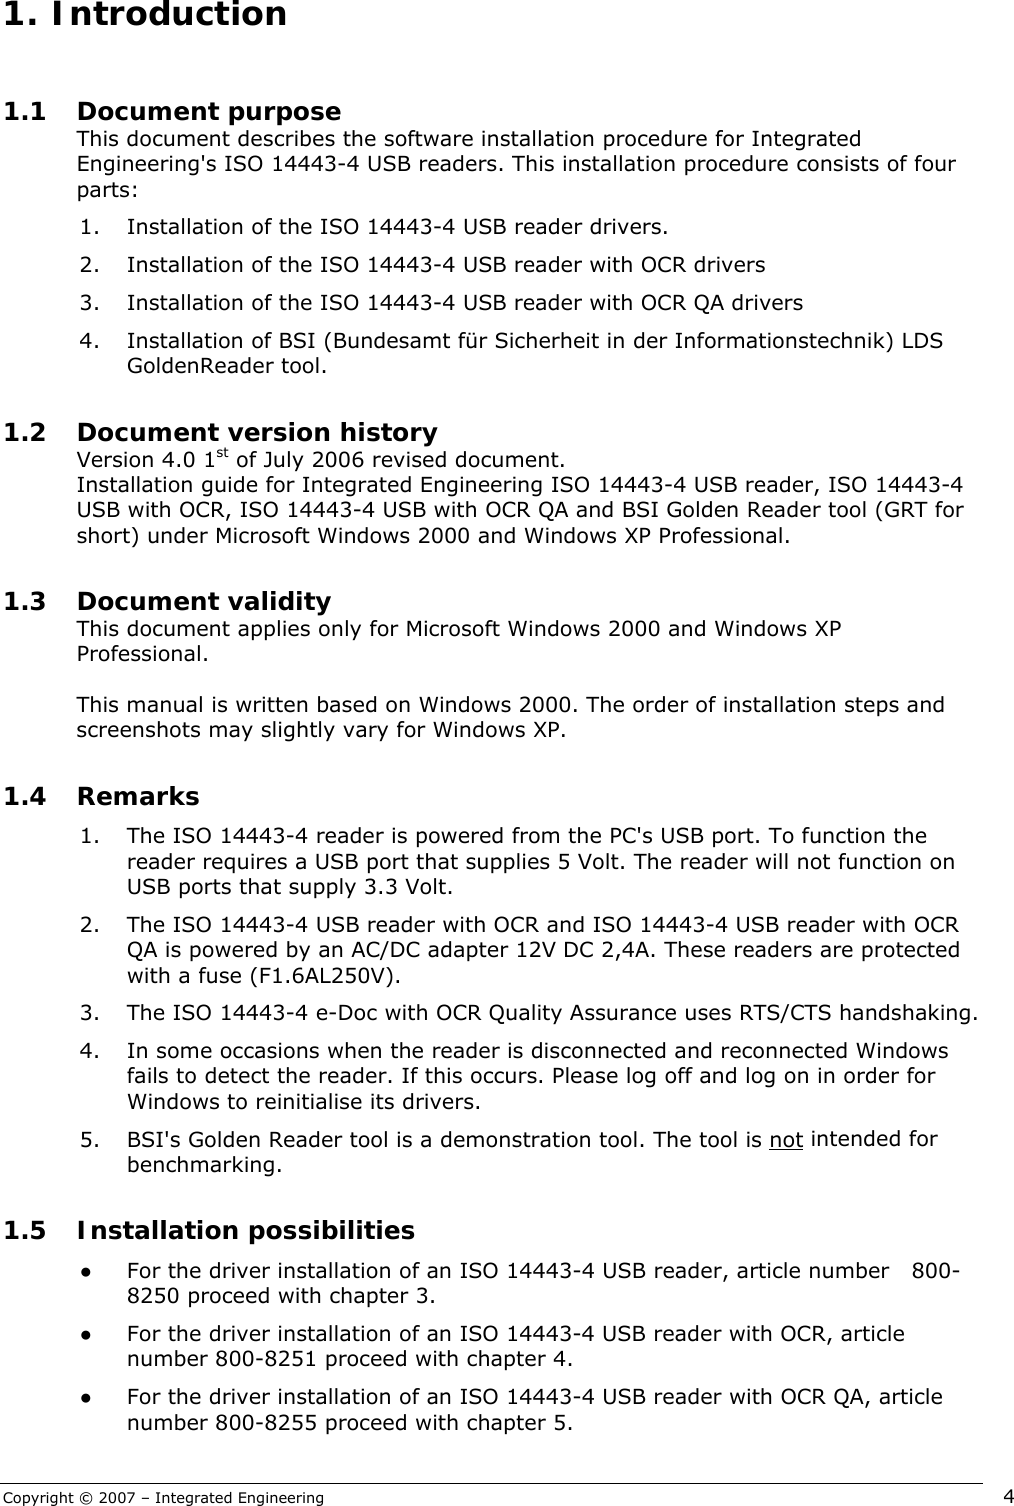 Copyright © 2007 – Integrated Engineering   4  1.1 Document purpose This document describes the software installation procedure for Integrated Engineering&apos;s ISO 14443-4 USB readers. This installation procedure consists of four parts: 1. Installation of the ISO 14443-4 USB reader drivers. 2. Installation of the ISO 14443-4 USB reader with OCR drivers  3. Installation of the ISO 14443-4 USB reader with OCR QA drivers 4. Installation of BSI (Bundesamt für Sicherheit in der Informationstechnik) LDS GoldenReader tool.  1.2 Document version history Version 4.0 1st of July 2006 revised document.  Installation guide for Integrated Engineering ISO 14443-4 USB reader, ISO 14443-4 USB with OCR, ISO 14443-4 USB with OCR QA and BSI Golden Reader tool (GRT for short) under Microsoft Windows 2000 and Windows XP Professional.  1.3 Document validity This document applies only for Microsoft Windows 2000 and Windows XP Professional.   This manual is written based on Windows 2000. The order of installation steps and screenshots may slightly vary for Windows XP.  1.4 Remarks 1. The ISO 14443-4 reader is powered from the PC&apos;s USB port. To function the reader requires a USB port that supplies 5 Volt. The reader will not function on USB ports that supply 3.3 Volt. 2. The ISO 14443-4 USB reader with OCR and ISO 14443-4 USB reader with OCR QA is powered by an AC/DC adapter 12V DC 2,4A. These readers are protected with a fuse (F1.6AL250V). 3. The ISO 14443-4 e-Doc with OCR Quality Assurance uses RTS/CTS handshaking. 4. In some occasions when the reader is disconnected and reconnected Windows fails to detect the reader. If this occurs. Please log off and log on in order for Windows to reinitialise its drivers. 5. BSI&apos;s Golden Reader tool is a demonstration tool. The tool is not intended for benchmarking.  1.5 Installation possibilities ● For the driver installation of an ISO 14443-4 USB reader, article number   800-8250 proceed with chapter 3. ● For the driver installation of an ISO 14443-4 USB reader with OCR, article number 800-8251 proceed with chapter 4. ● For the driver installation of an ISO 14443-4 USB reader with OCR QA, article number 800-8255 proceed with chapter 5.  1.  Introduction 